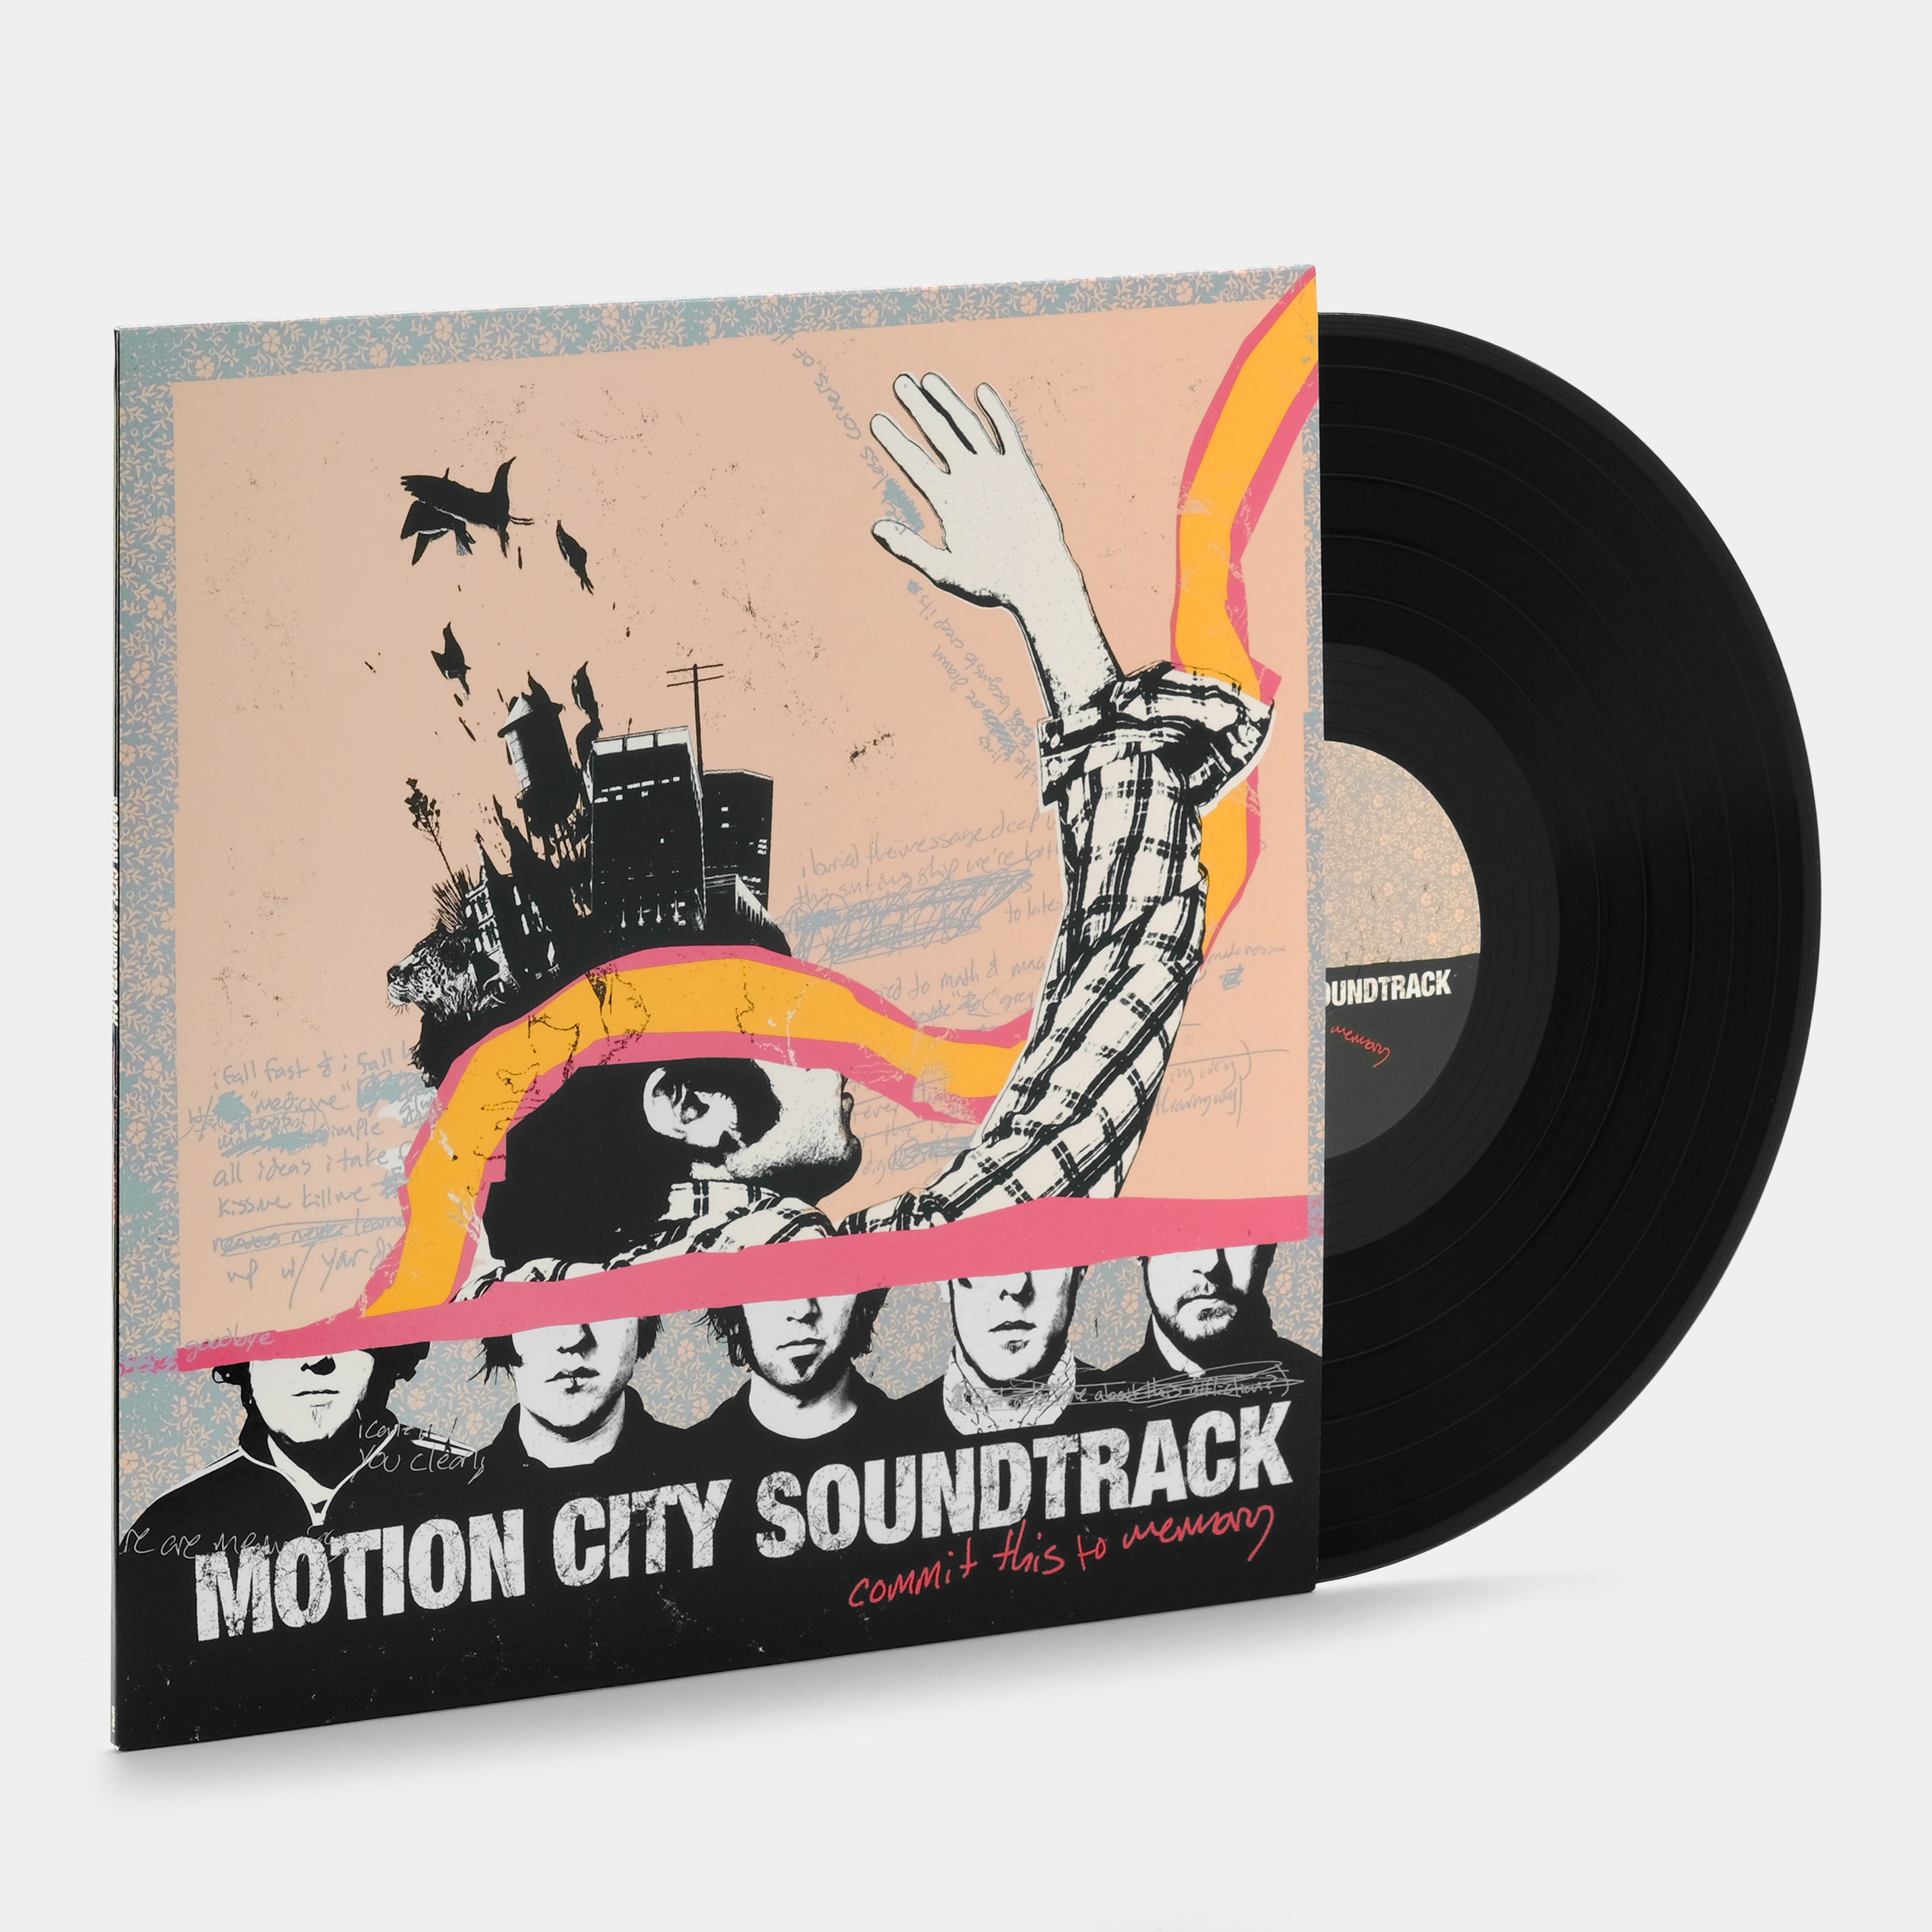 Motion City Soundtrack - Commit This To Memory LP Vinyl Record